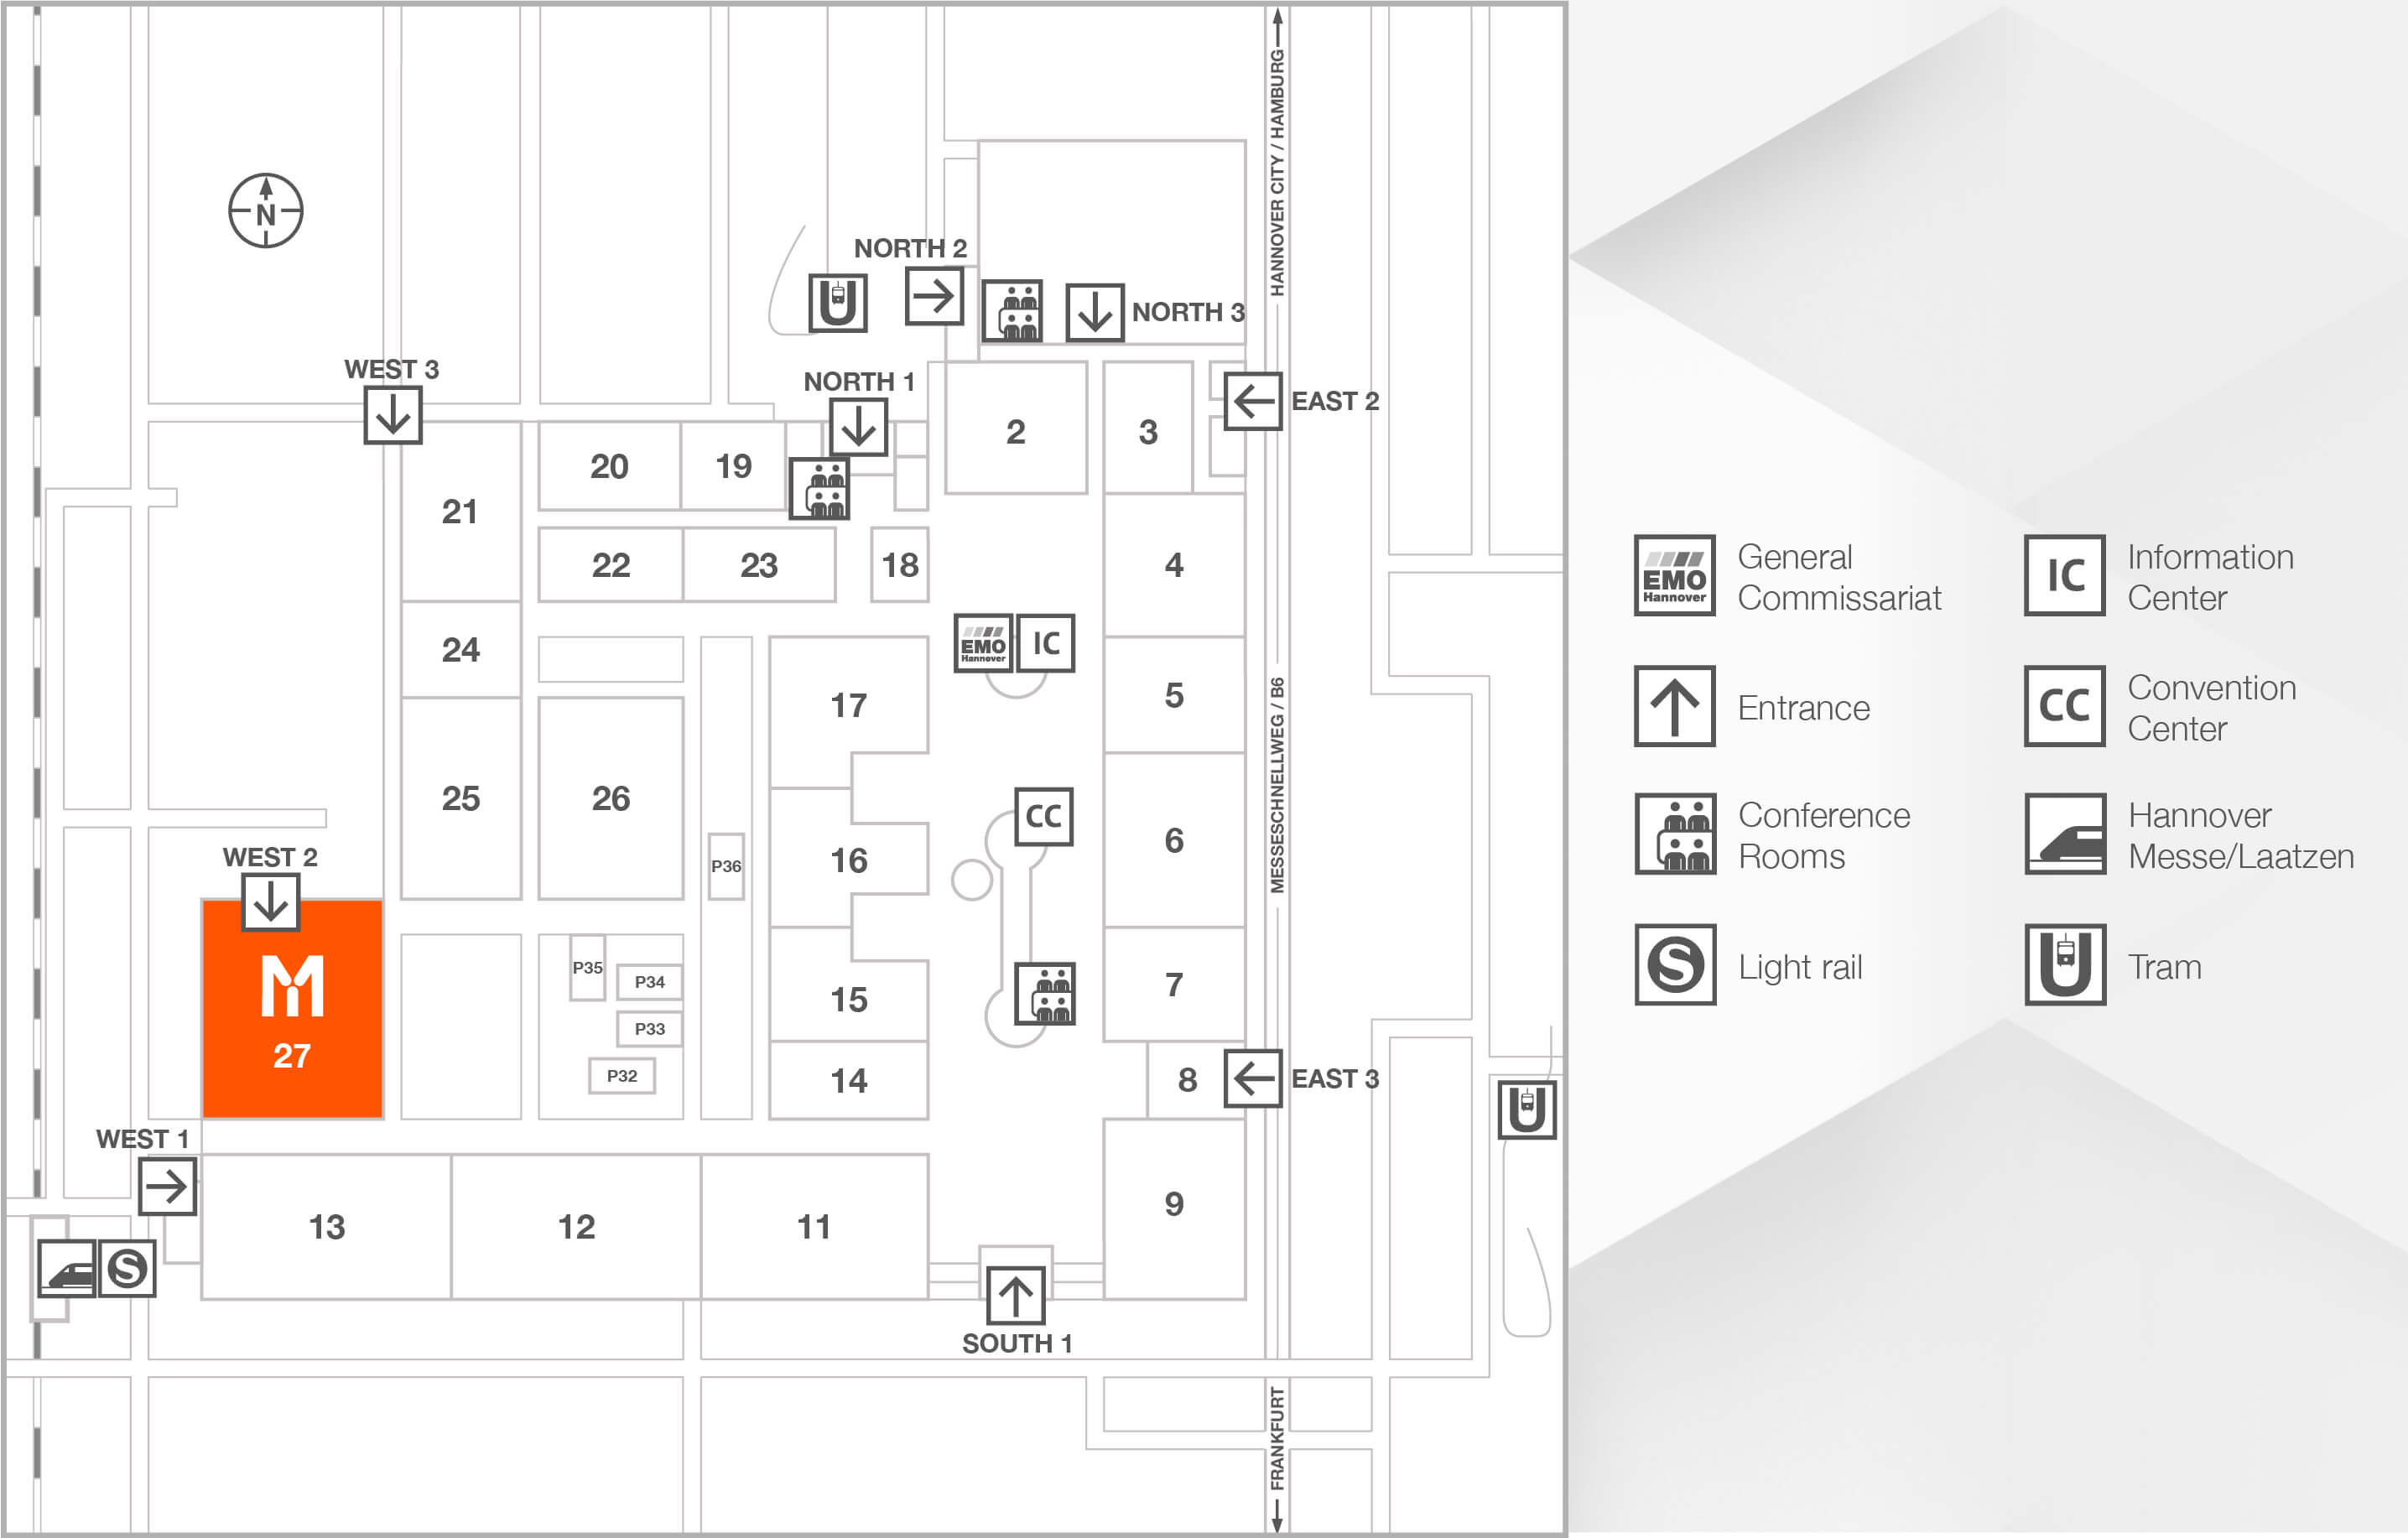 Floor Plan and Directions to EMO 2019 Hannover